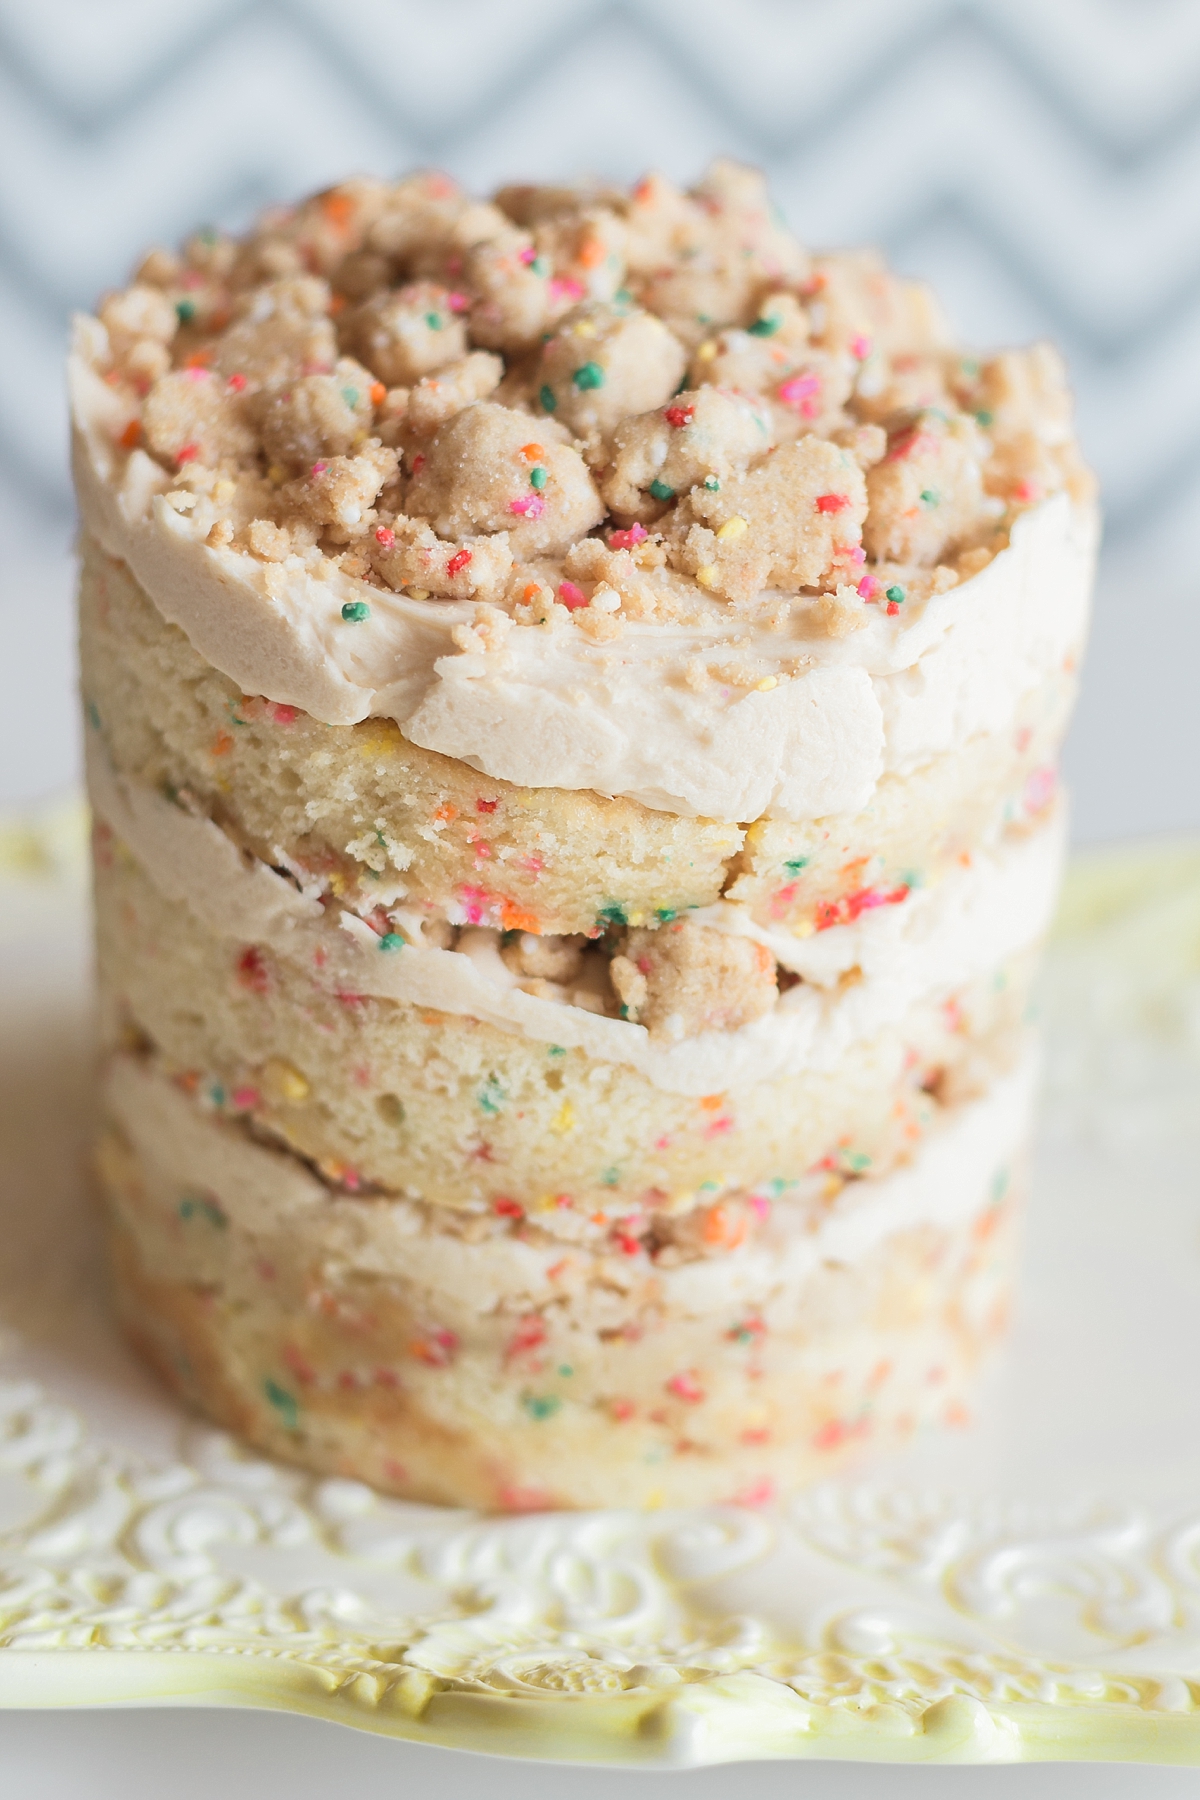 A how-to recipe to recreate Momofuku Milk Bar's famous Birthday Cake -- it's easier than it looks!